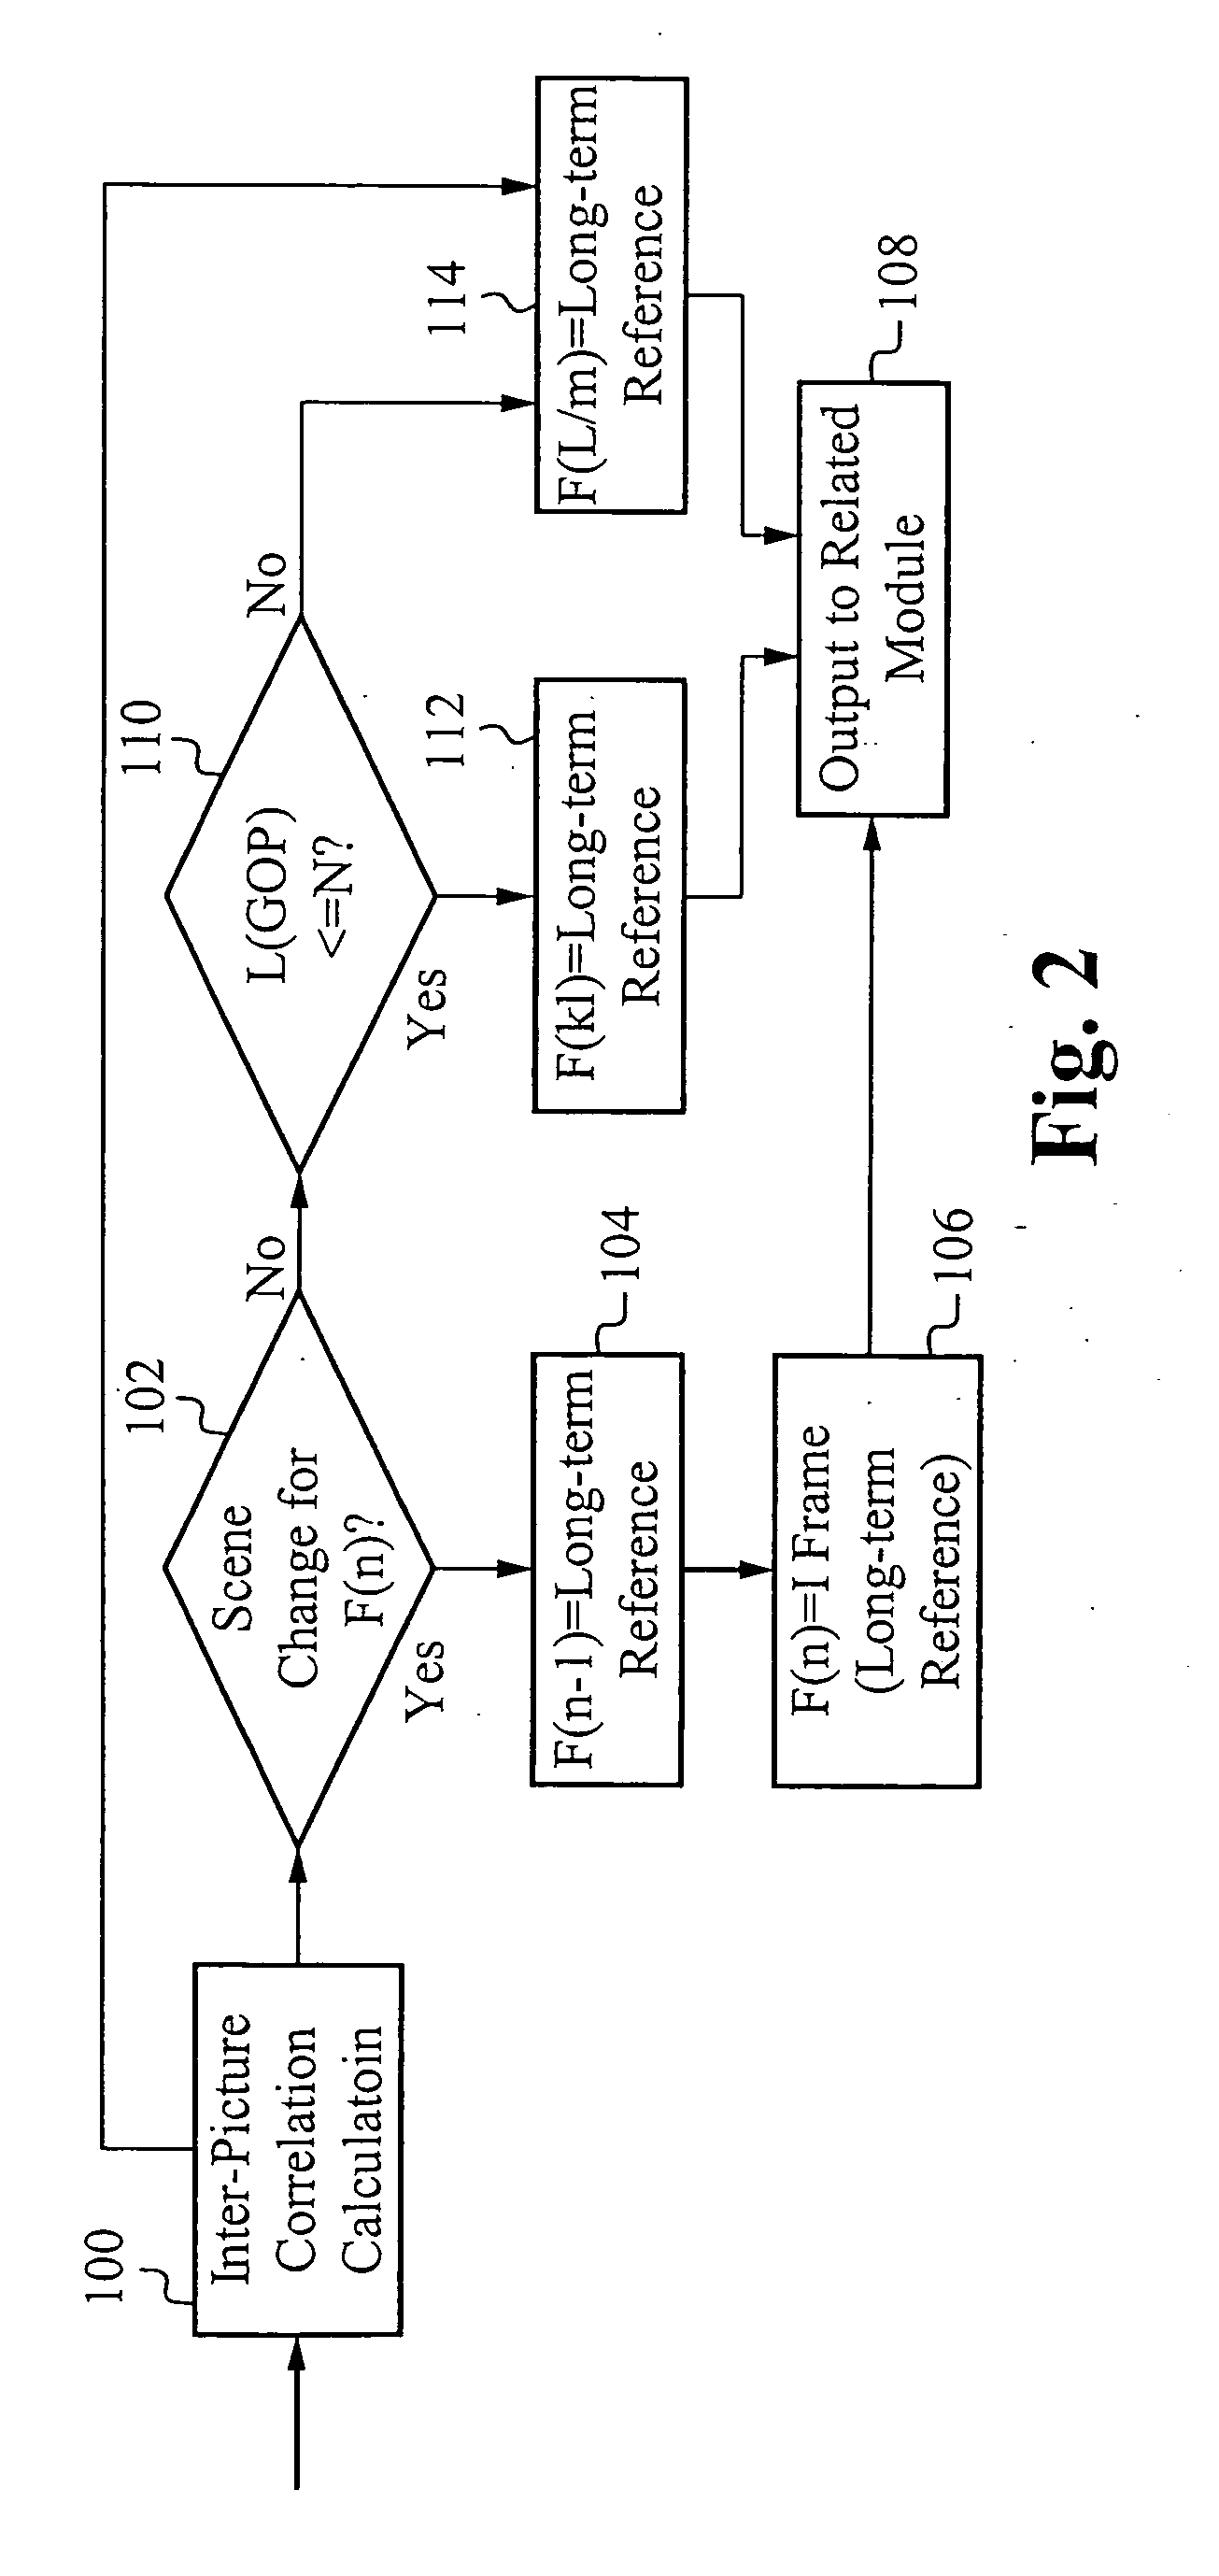 System and method for high quality AVC encoding